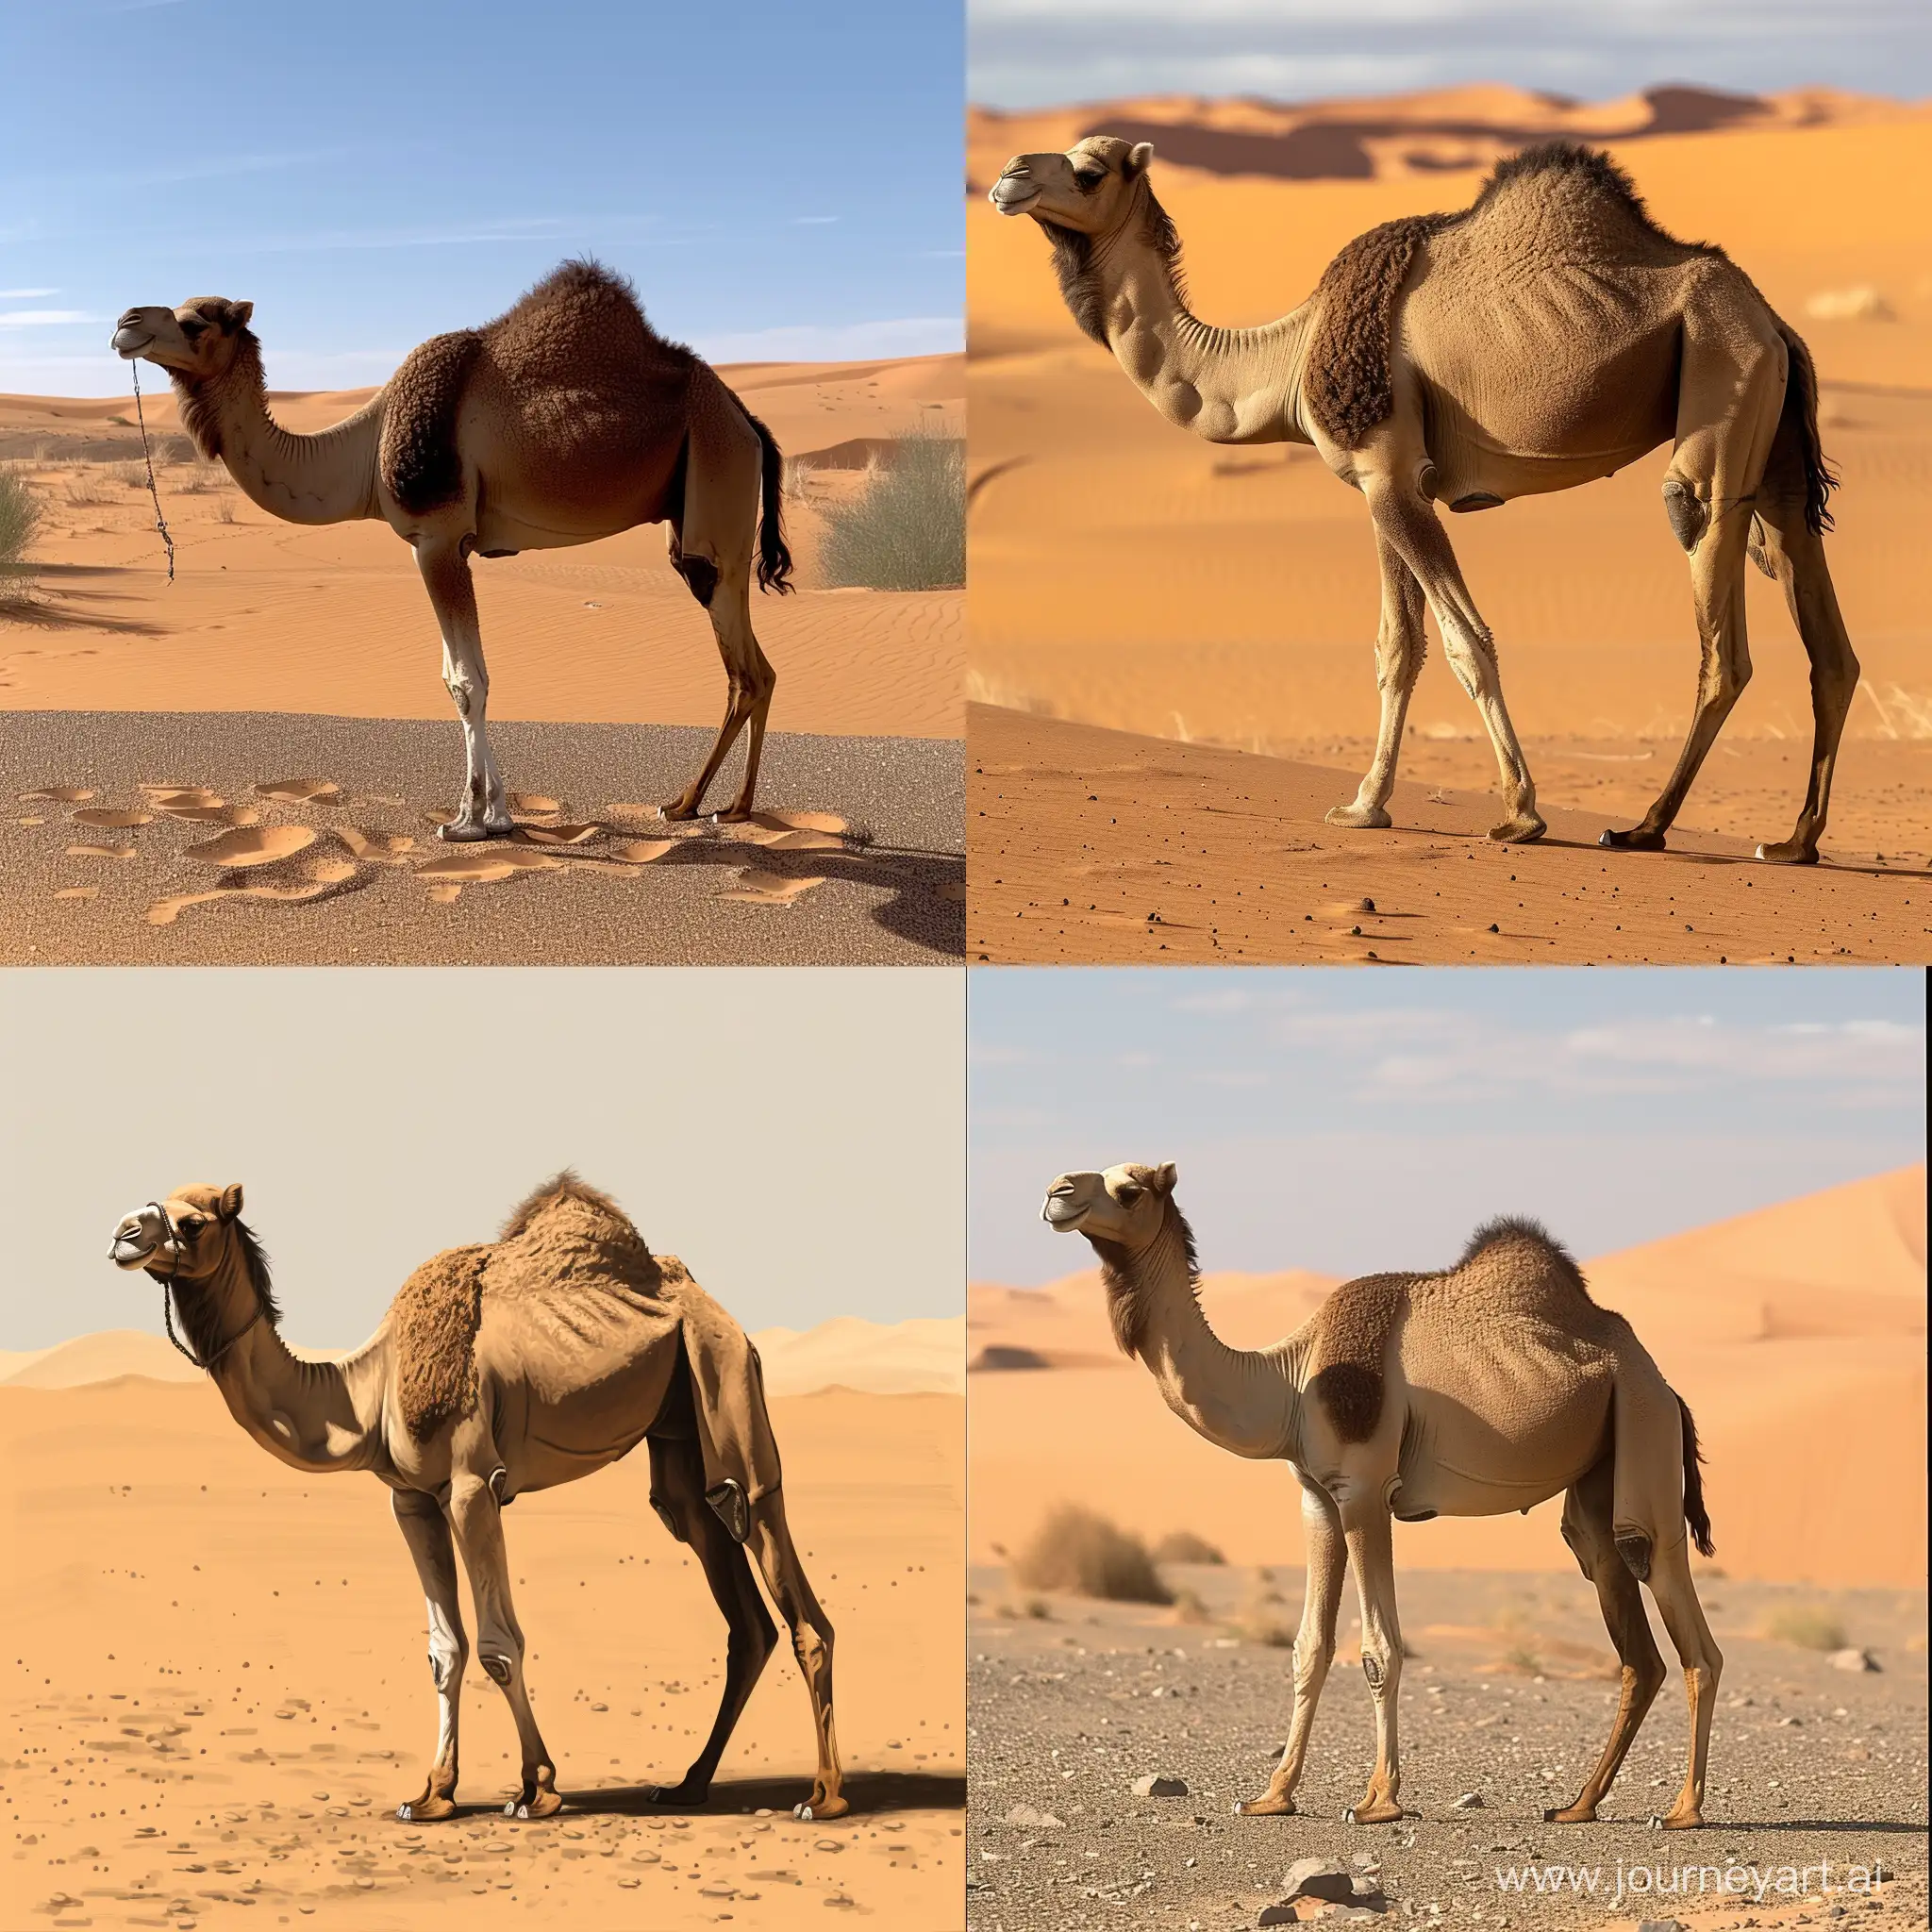 Amidst the desert's expanse, so vast and wide,
Roamed a small camel, with a stride of pride.
Stranded like Seafarer, in this barren land,
A creature of the desert, with grains of sand.
